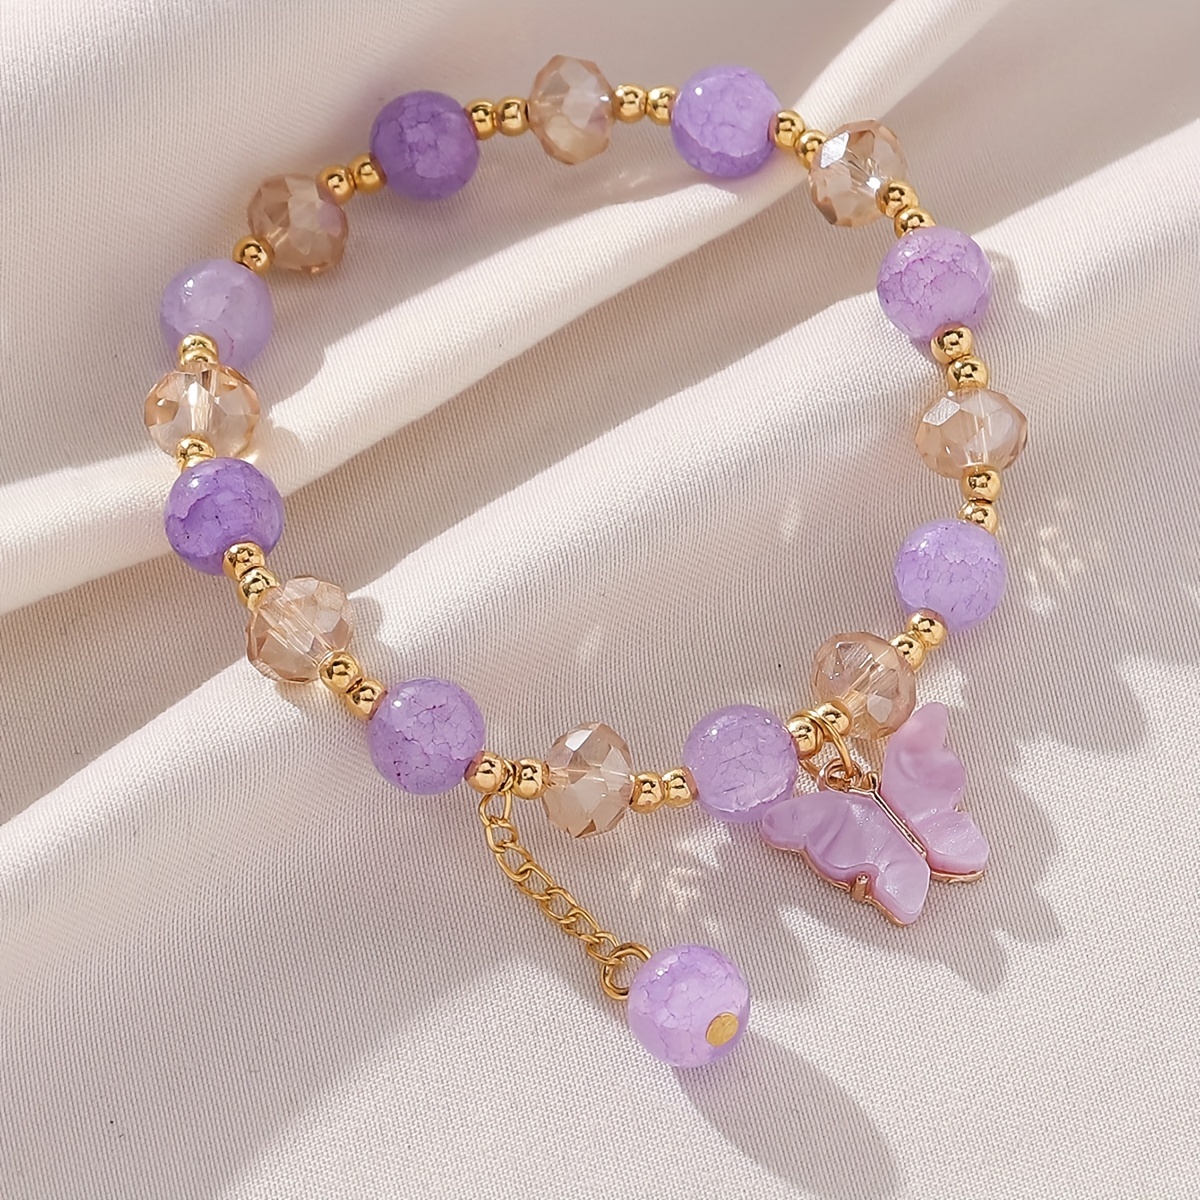 Amethyst Tiny beads – Social Change Butterfly